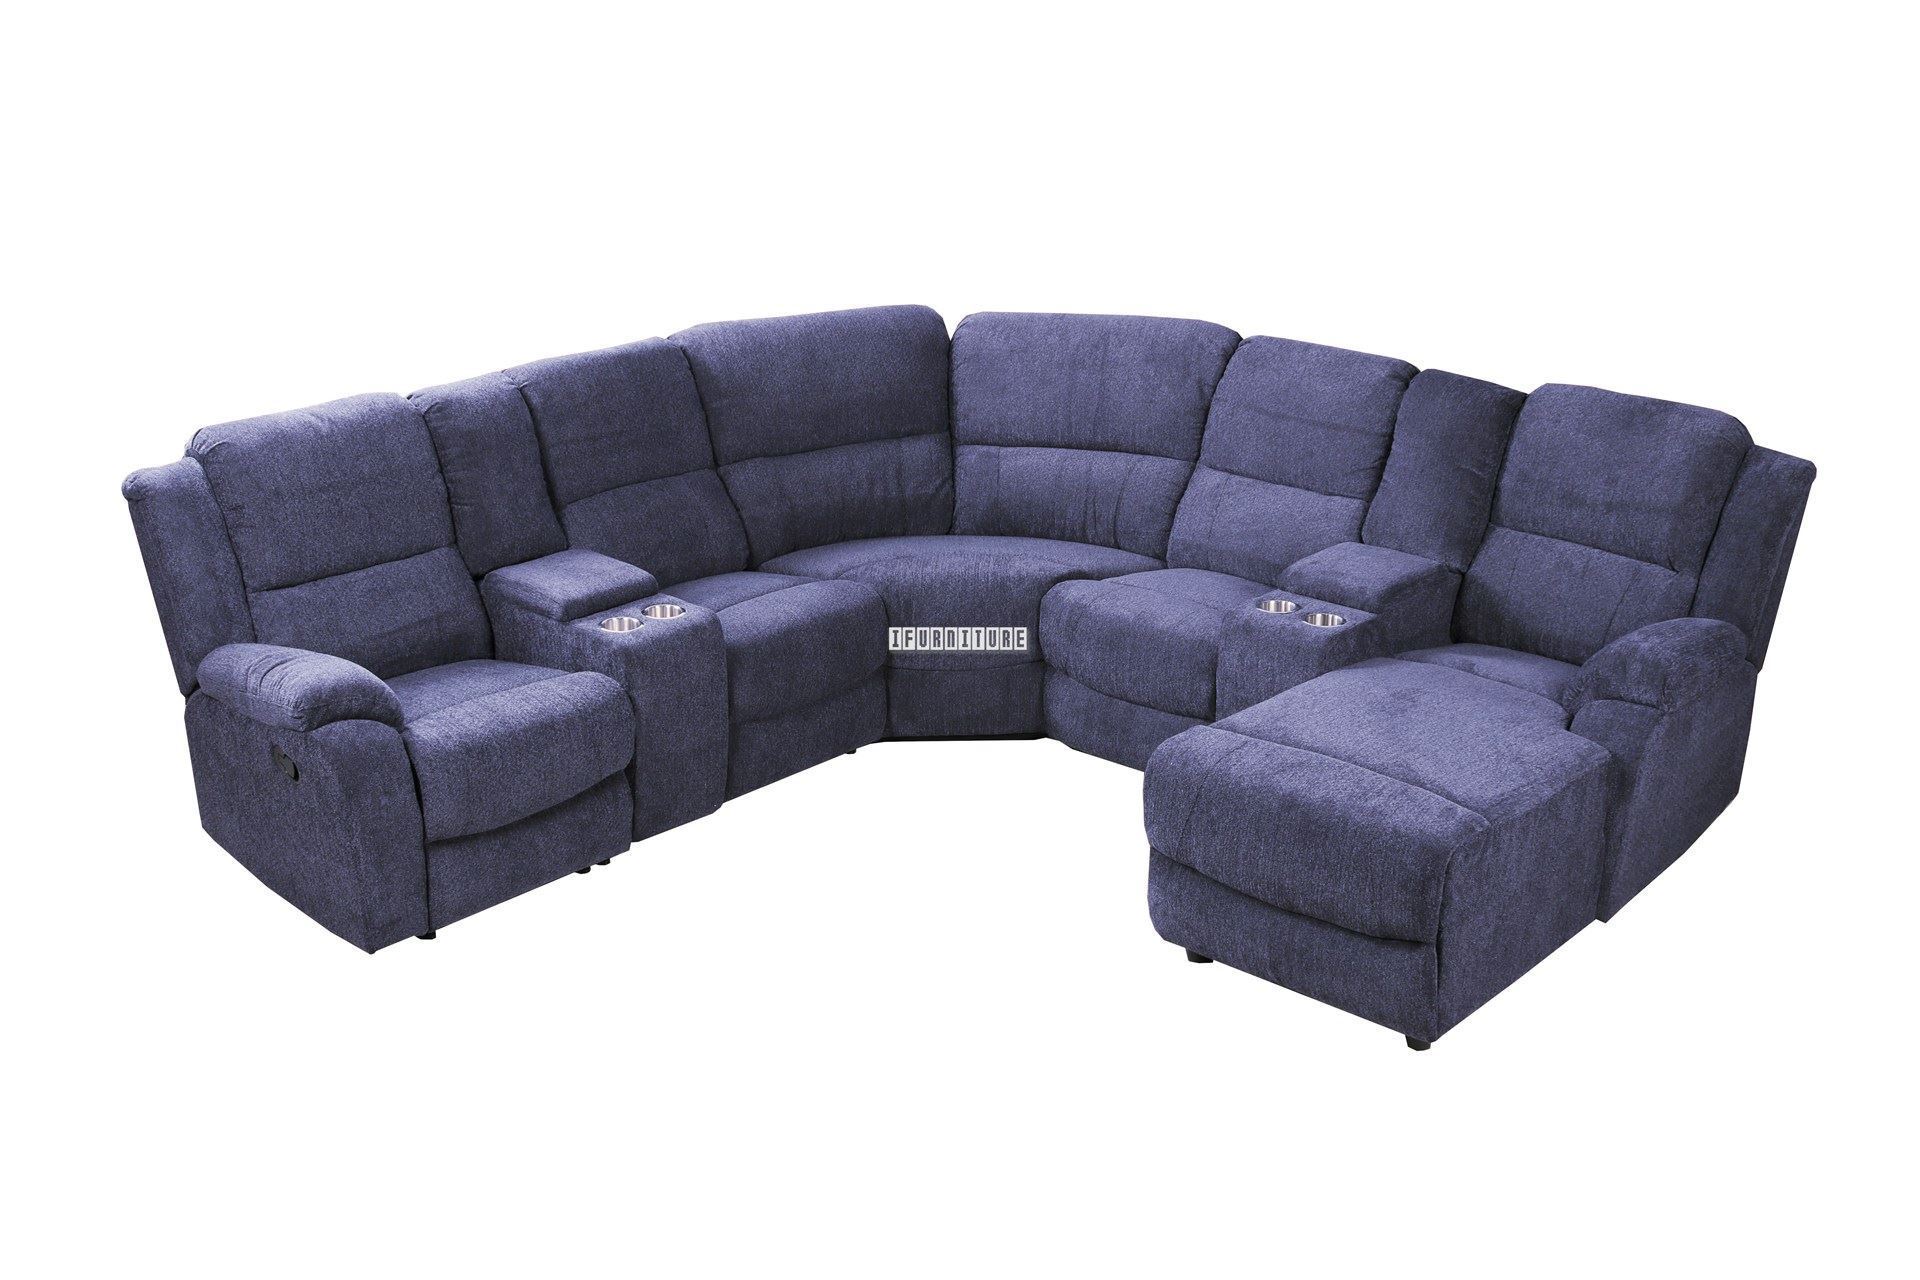 0034351 Alto Sectional Modular Reclining Sofa With Chaise Cup Holders And Storage 